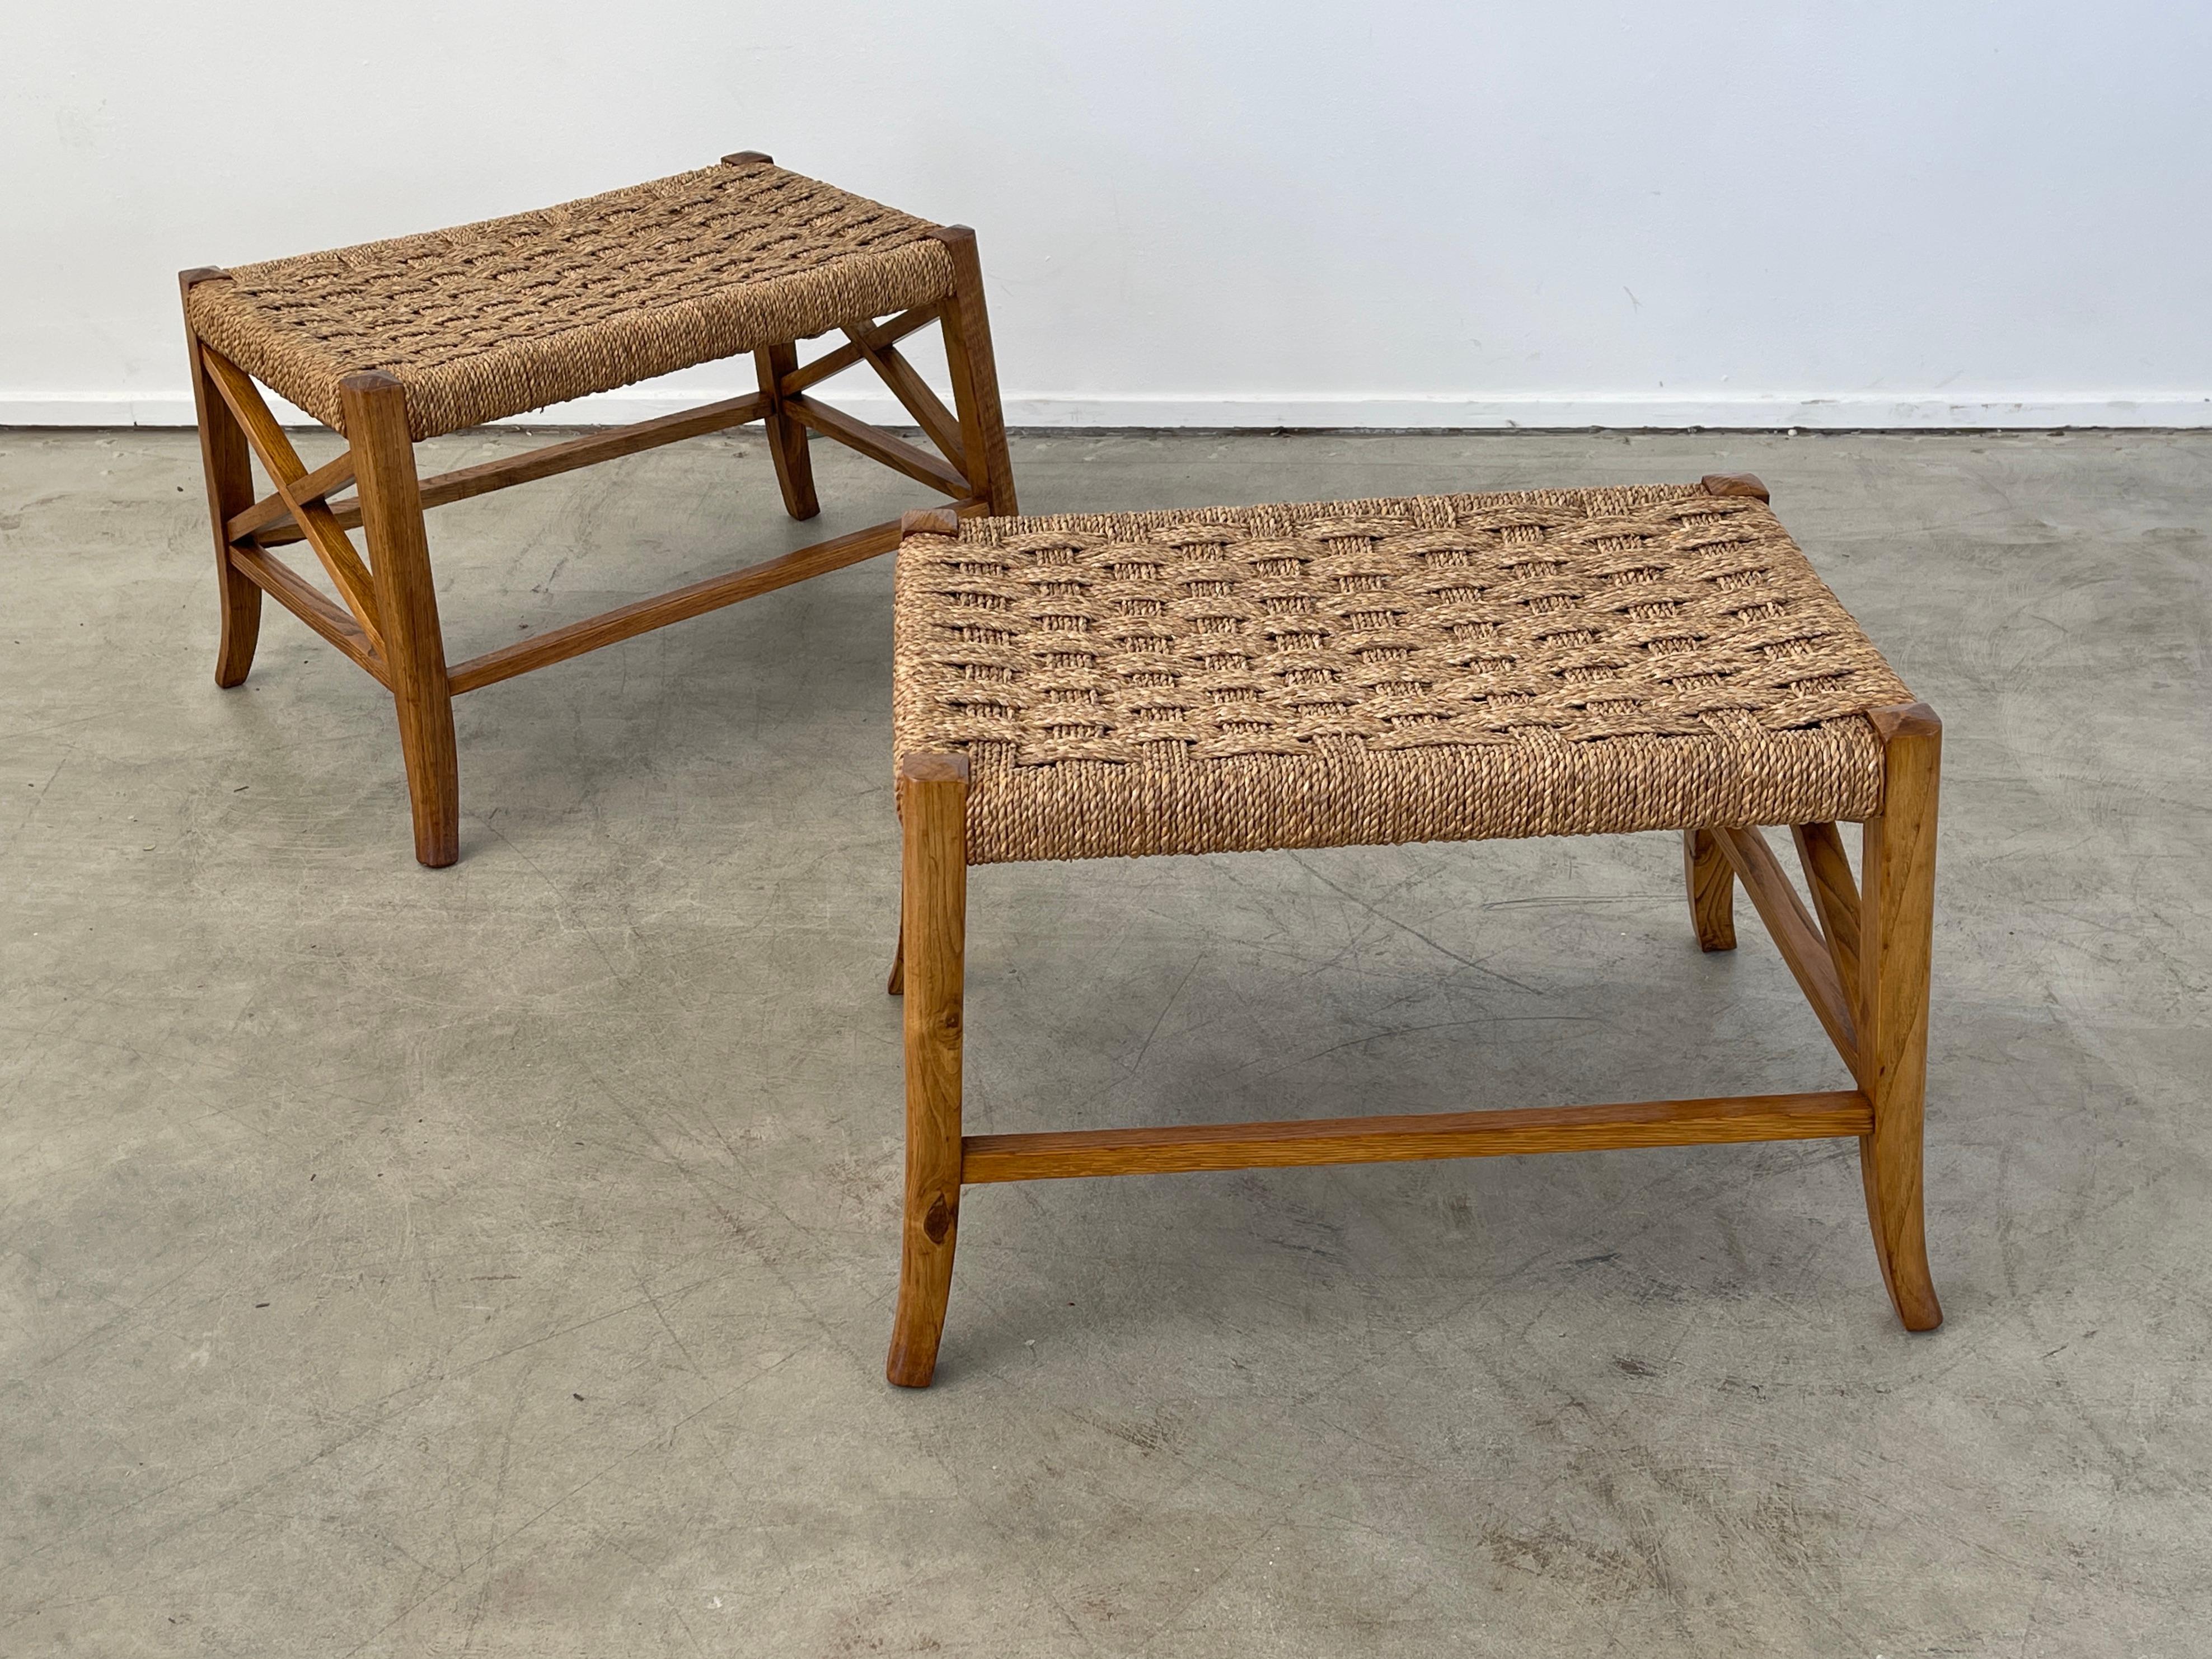 1950's Italian woven rushed foot stools with beautiful tapered legs and crossbar base.
Wonderful patina to wood.

Sold as a set.